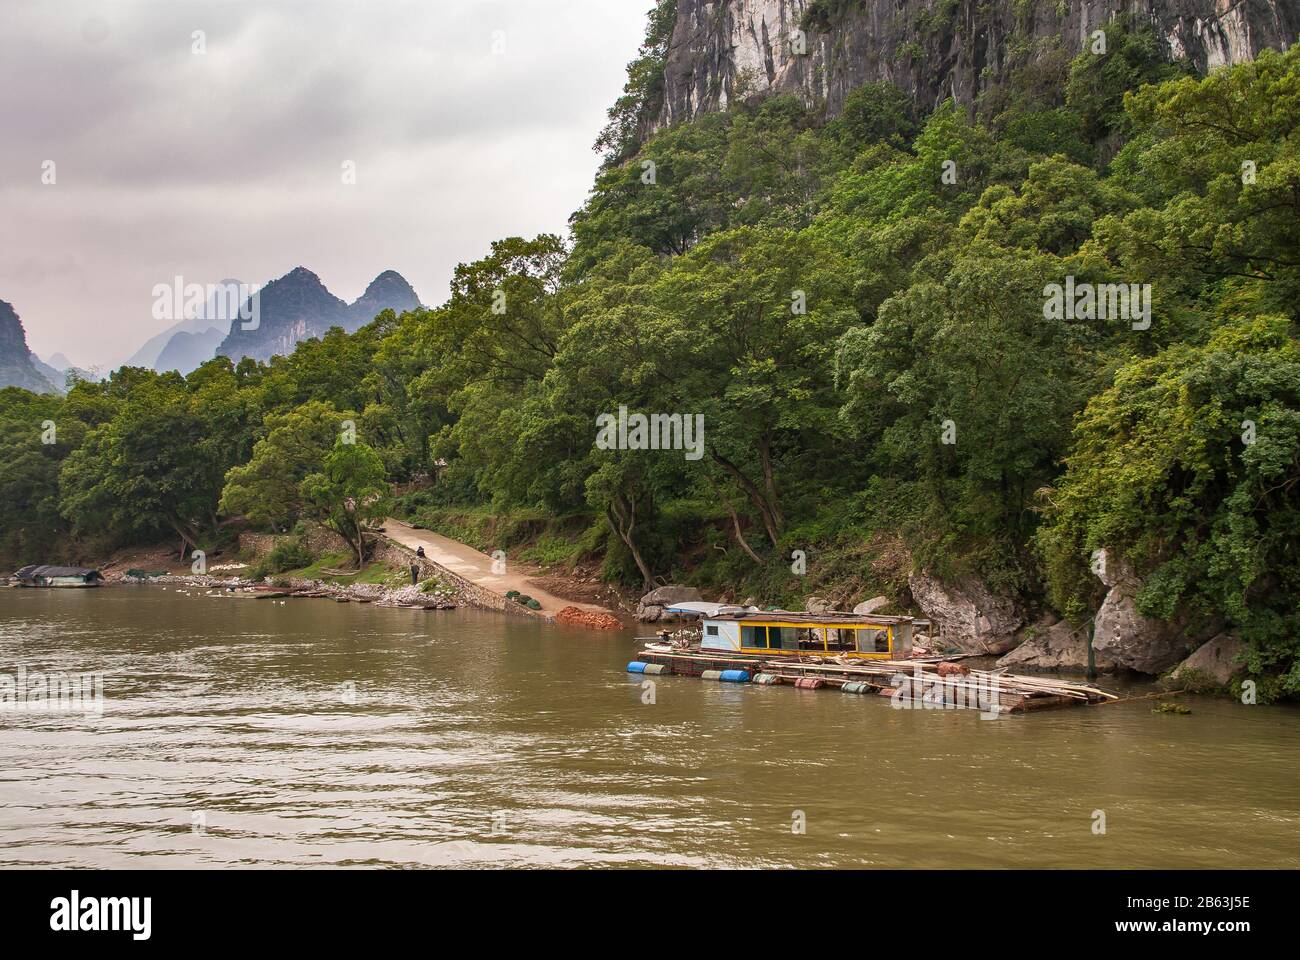 Guilin, China - May 10, 2010: Along Li River. Long Barrel supported raft with construction tools anchored near point where road reaches water. Green f Stock Photo